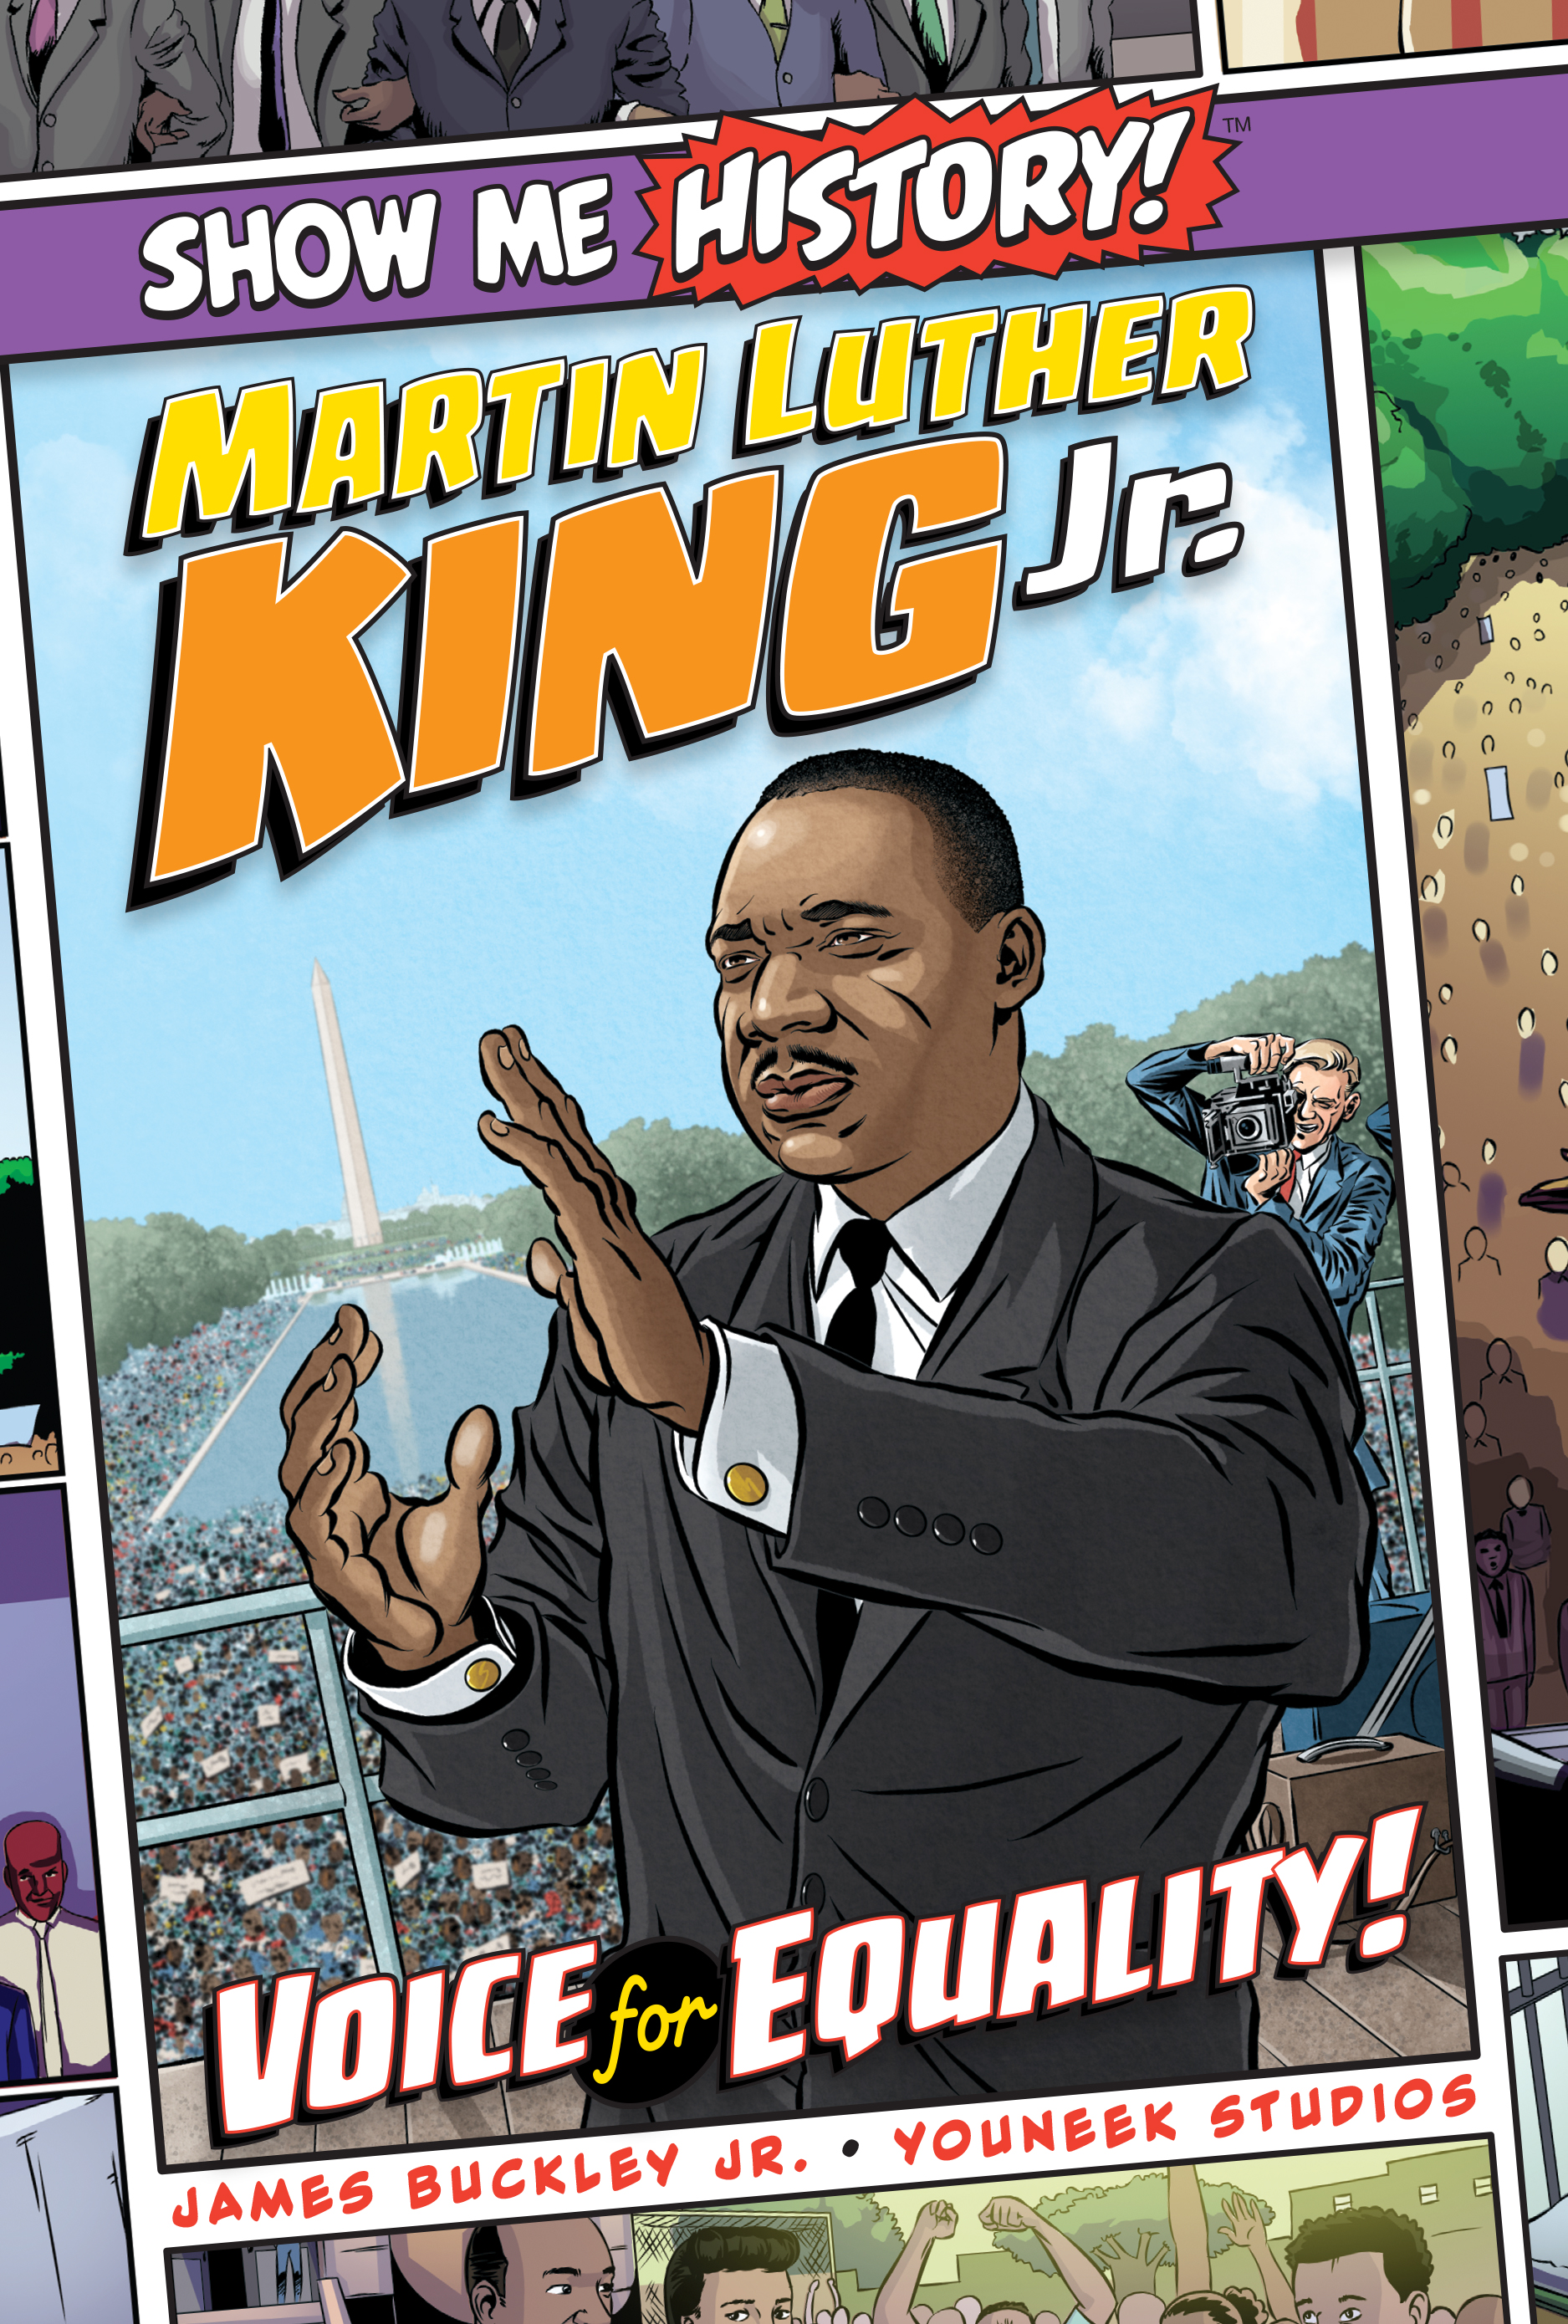 Martin Luther King Jr.: Voice for Equality!